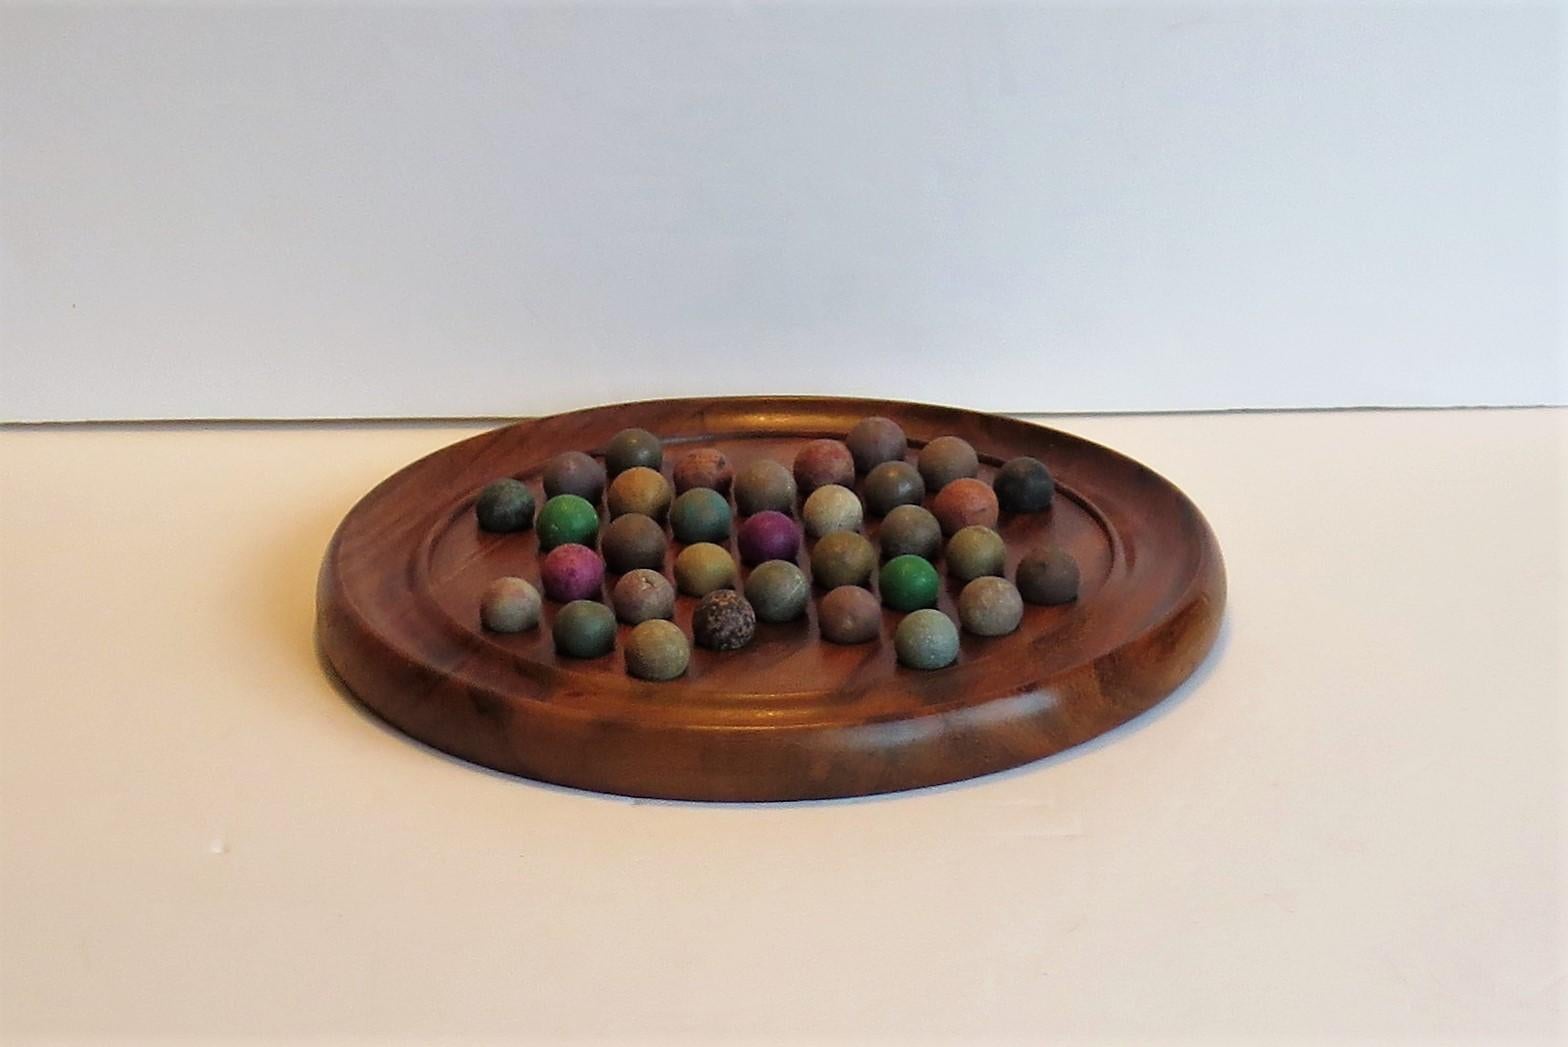 This is a complete game of marble solitaire, having a very good walnut board and a complete set of early clay and stone 19th century marbles.

The circular turned board is made of walnut and has an excellent natural grain pattern and color. The